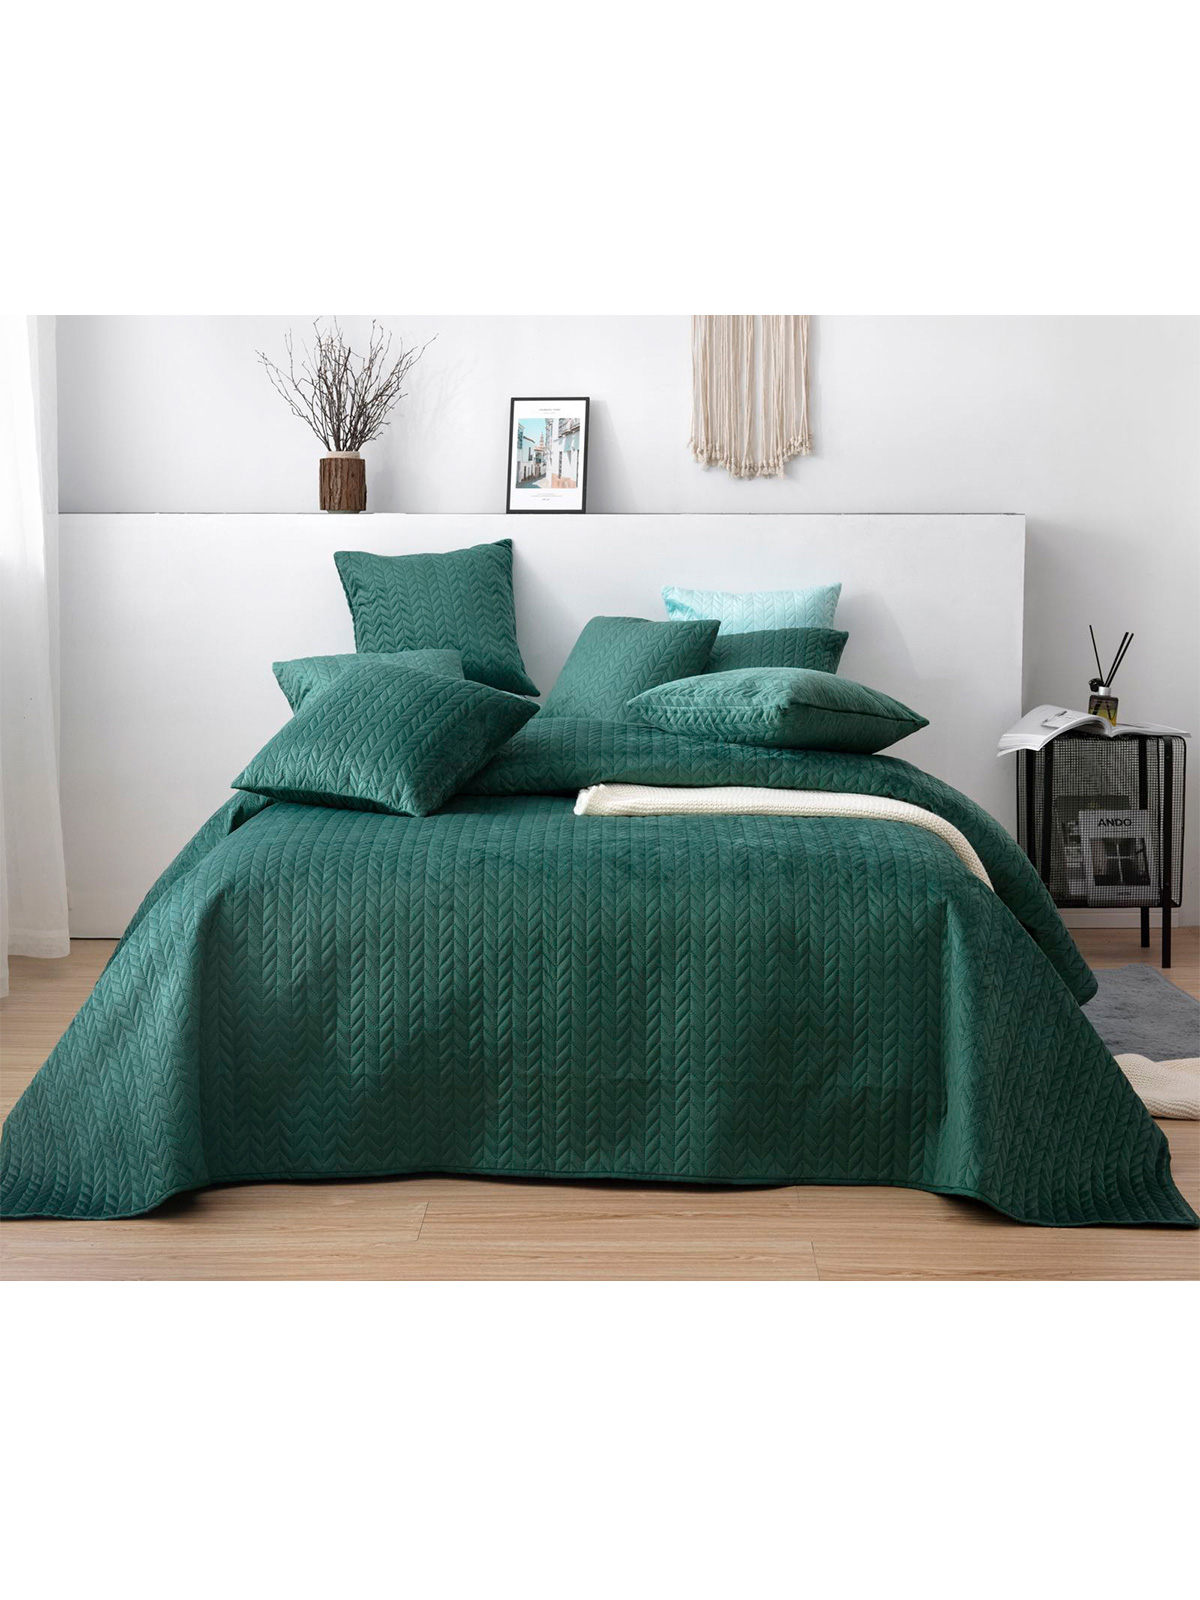 Edoti Quilted Bedspread Moxie A544